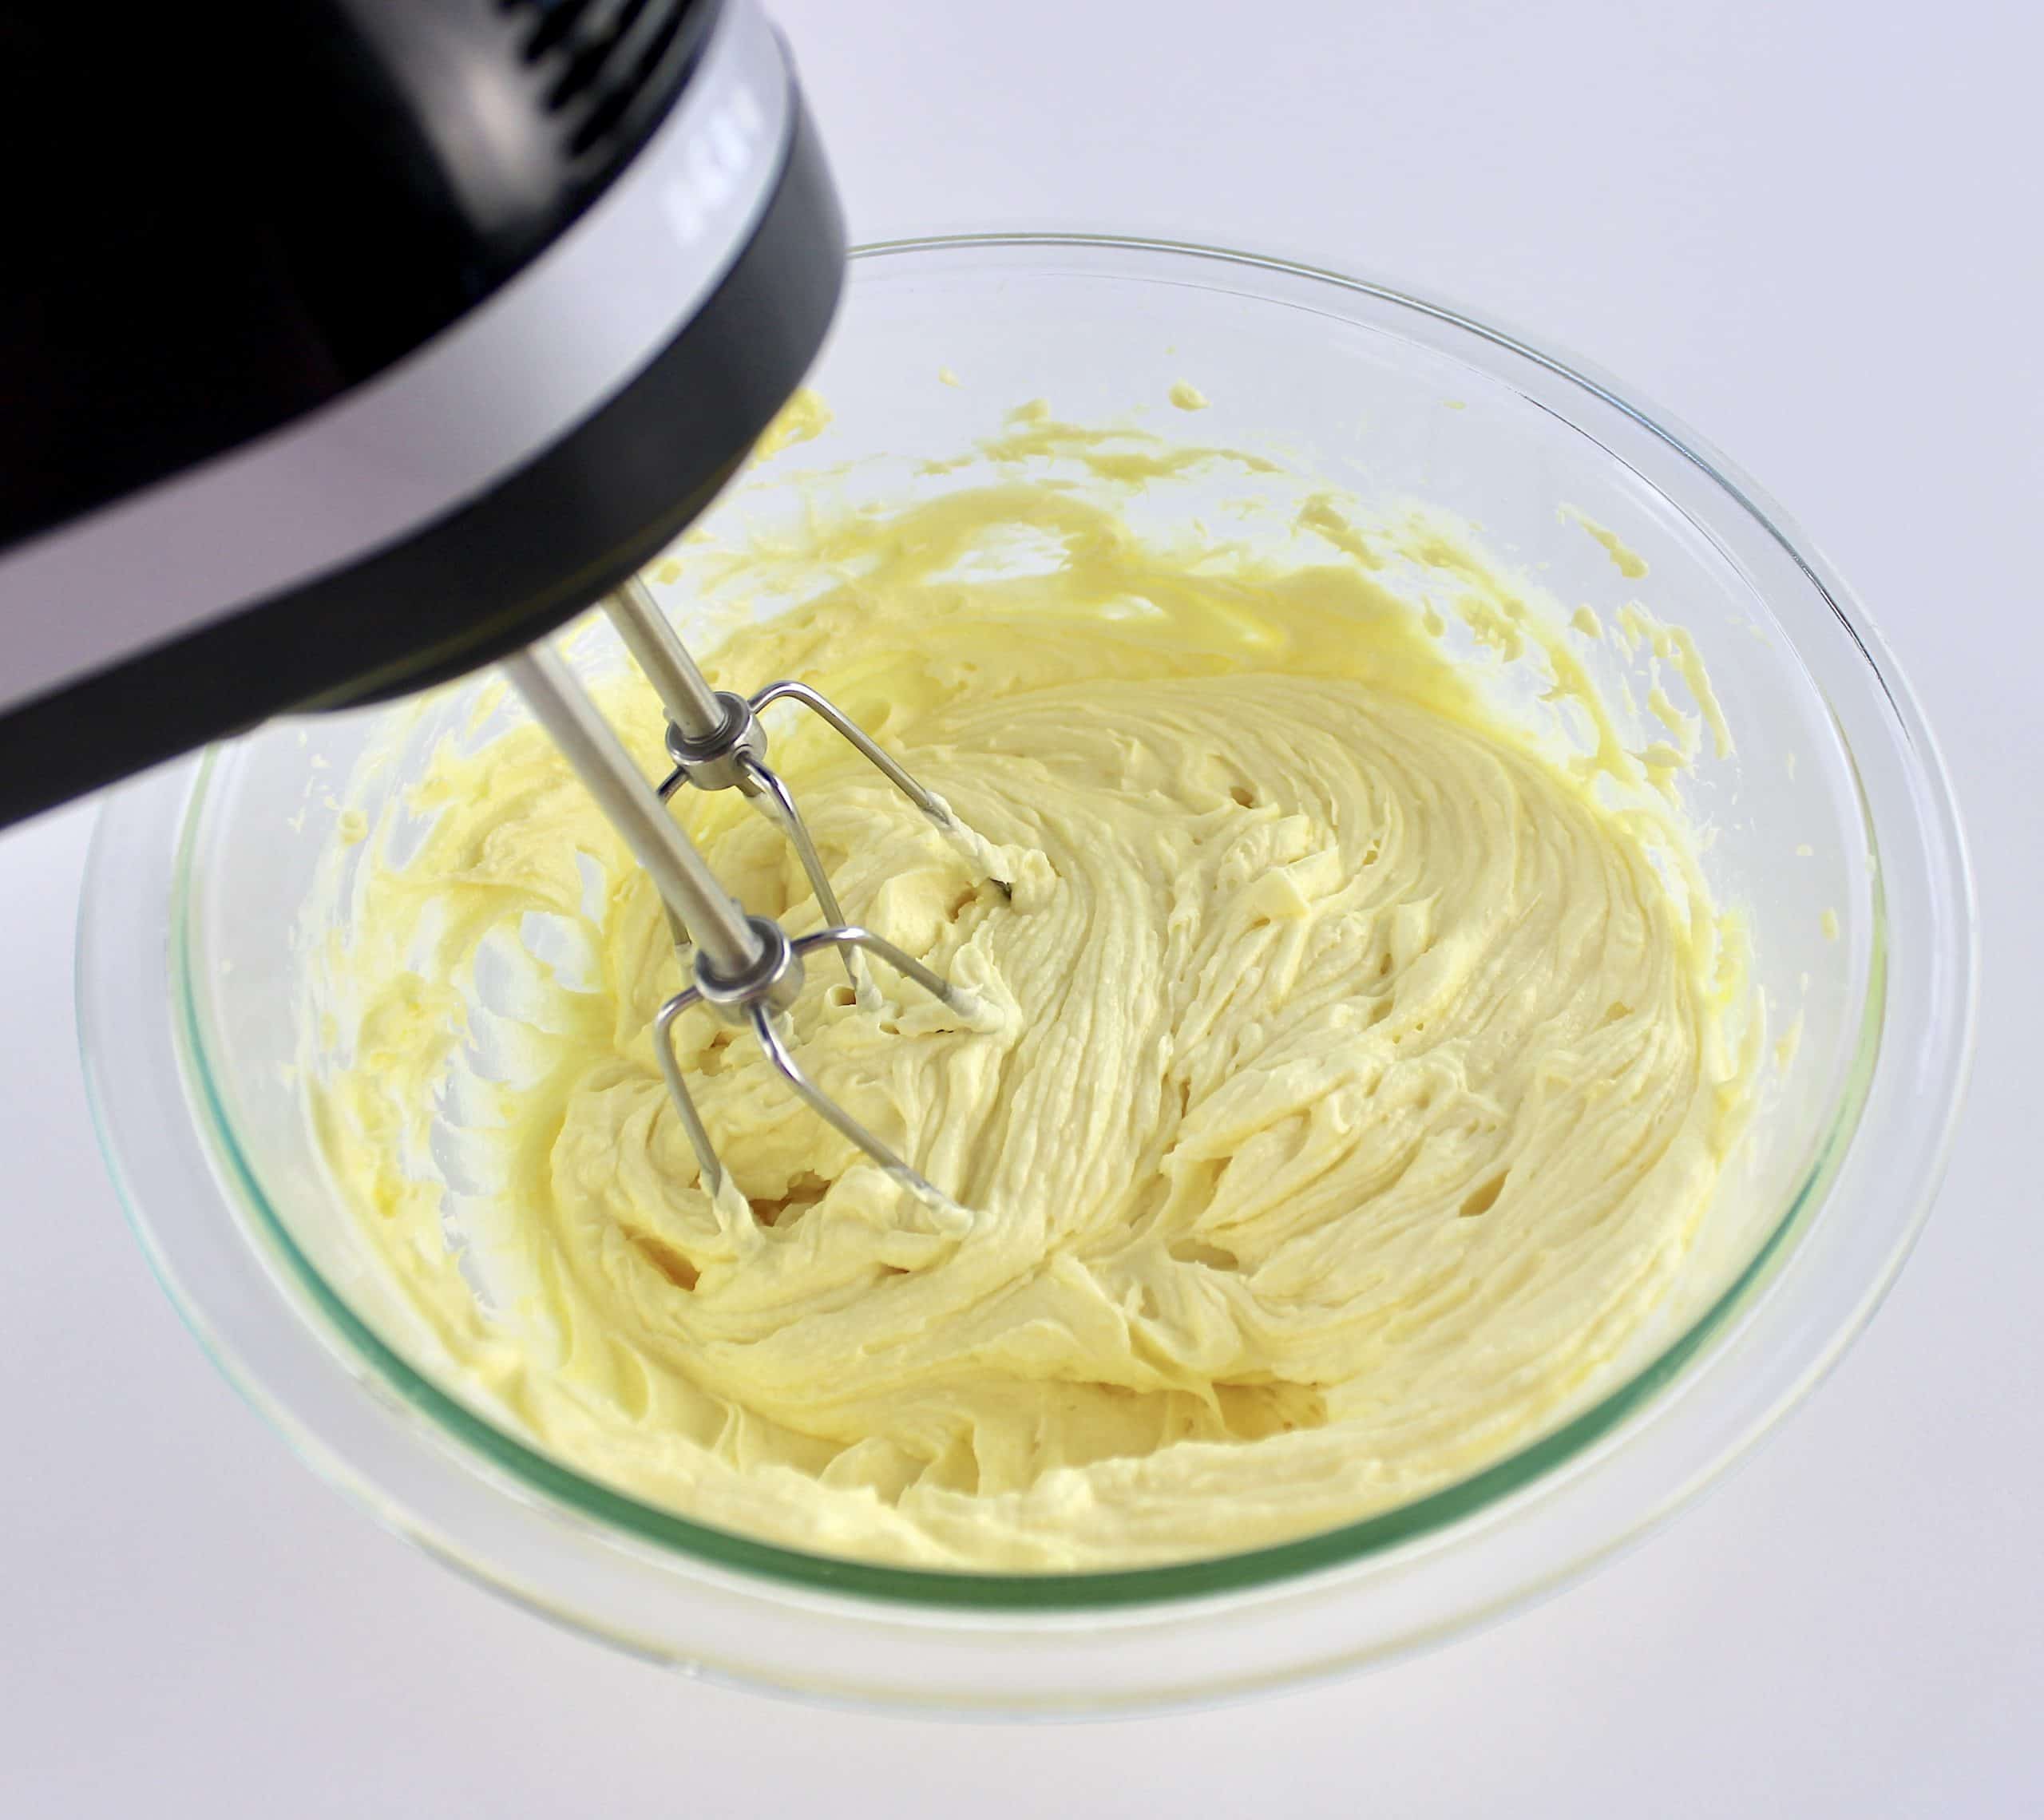 lemon frosting being mixed with hand mixer in glass bowl